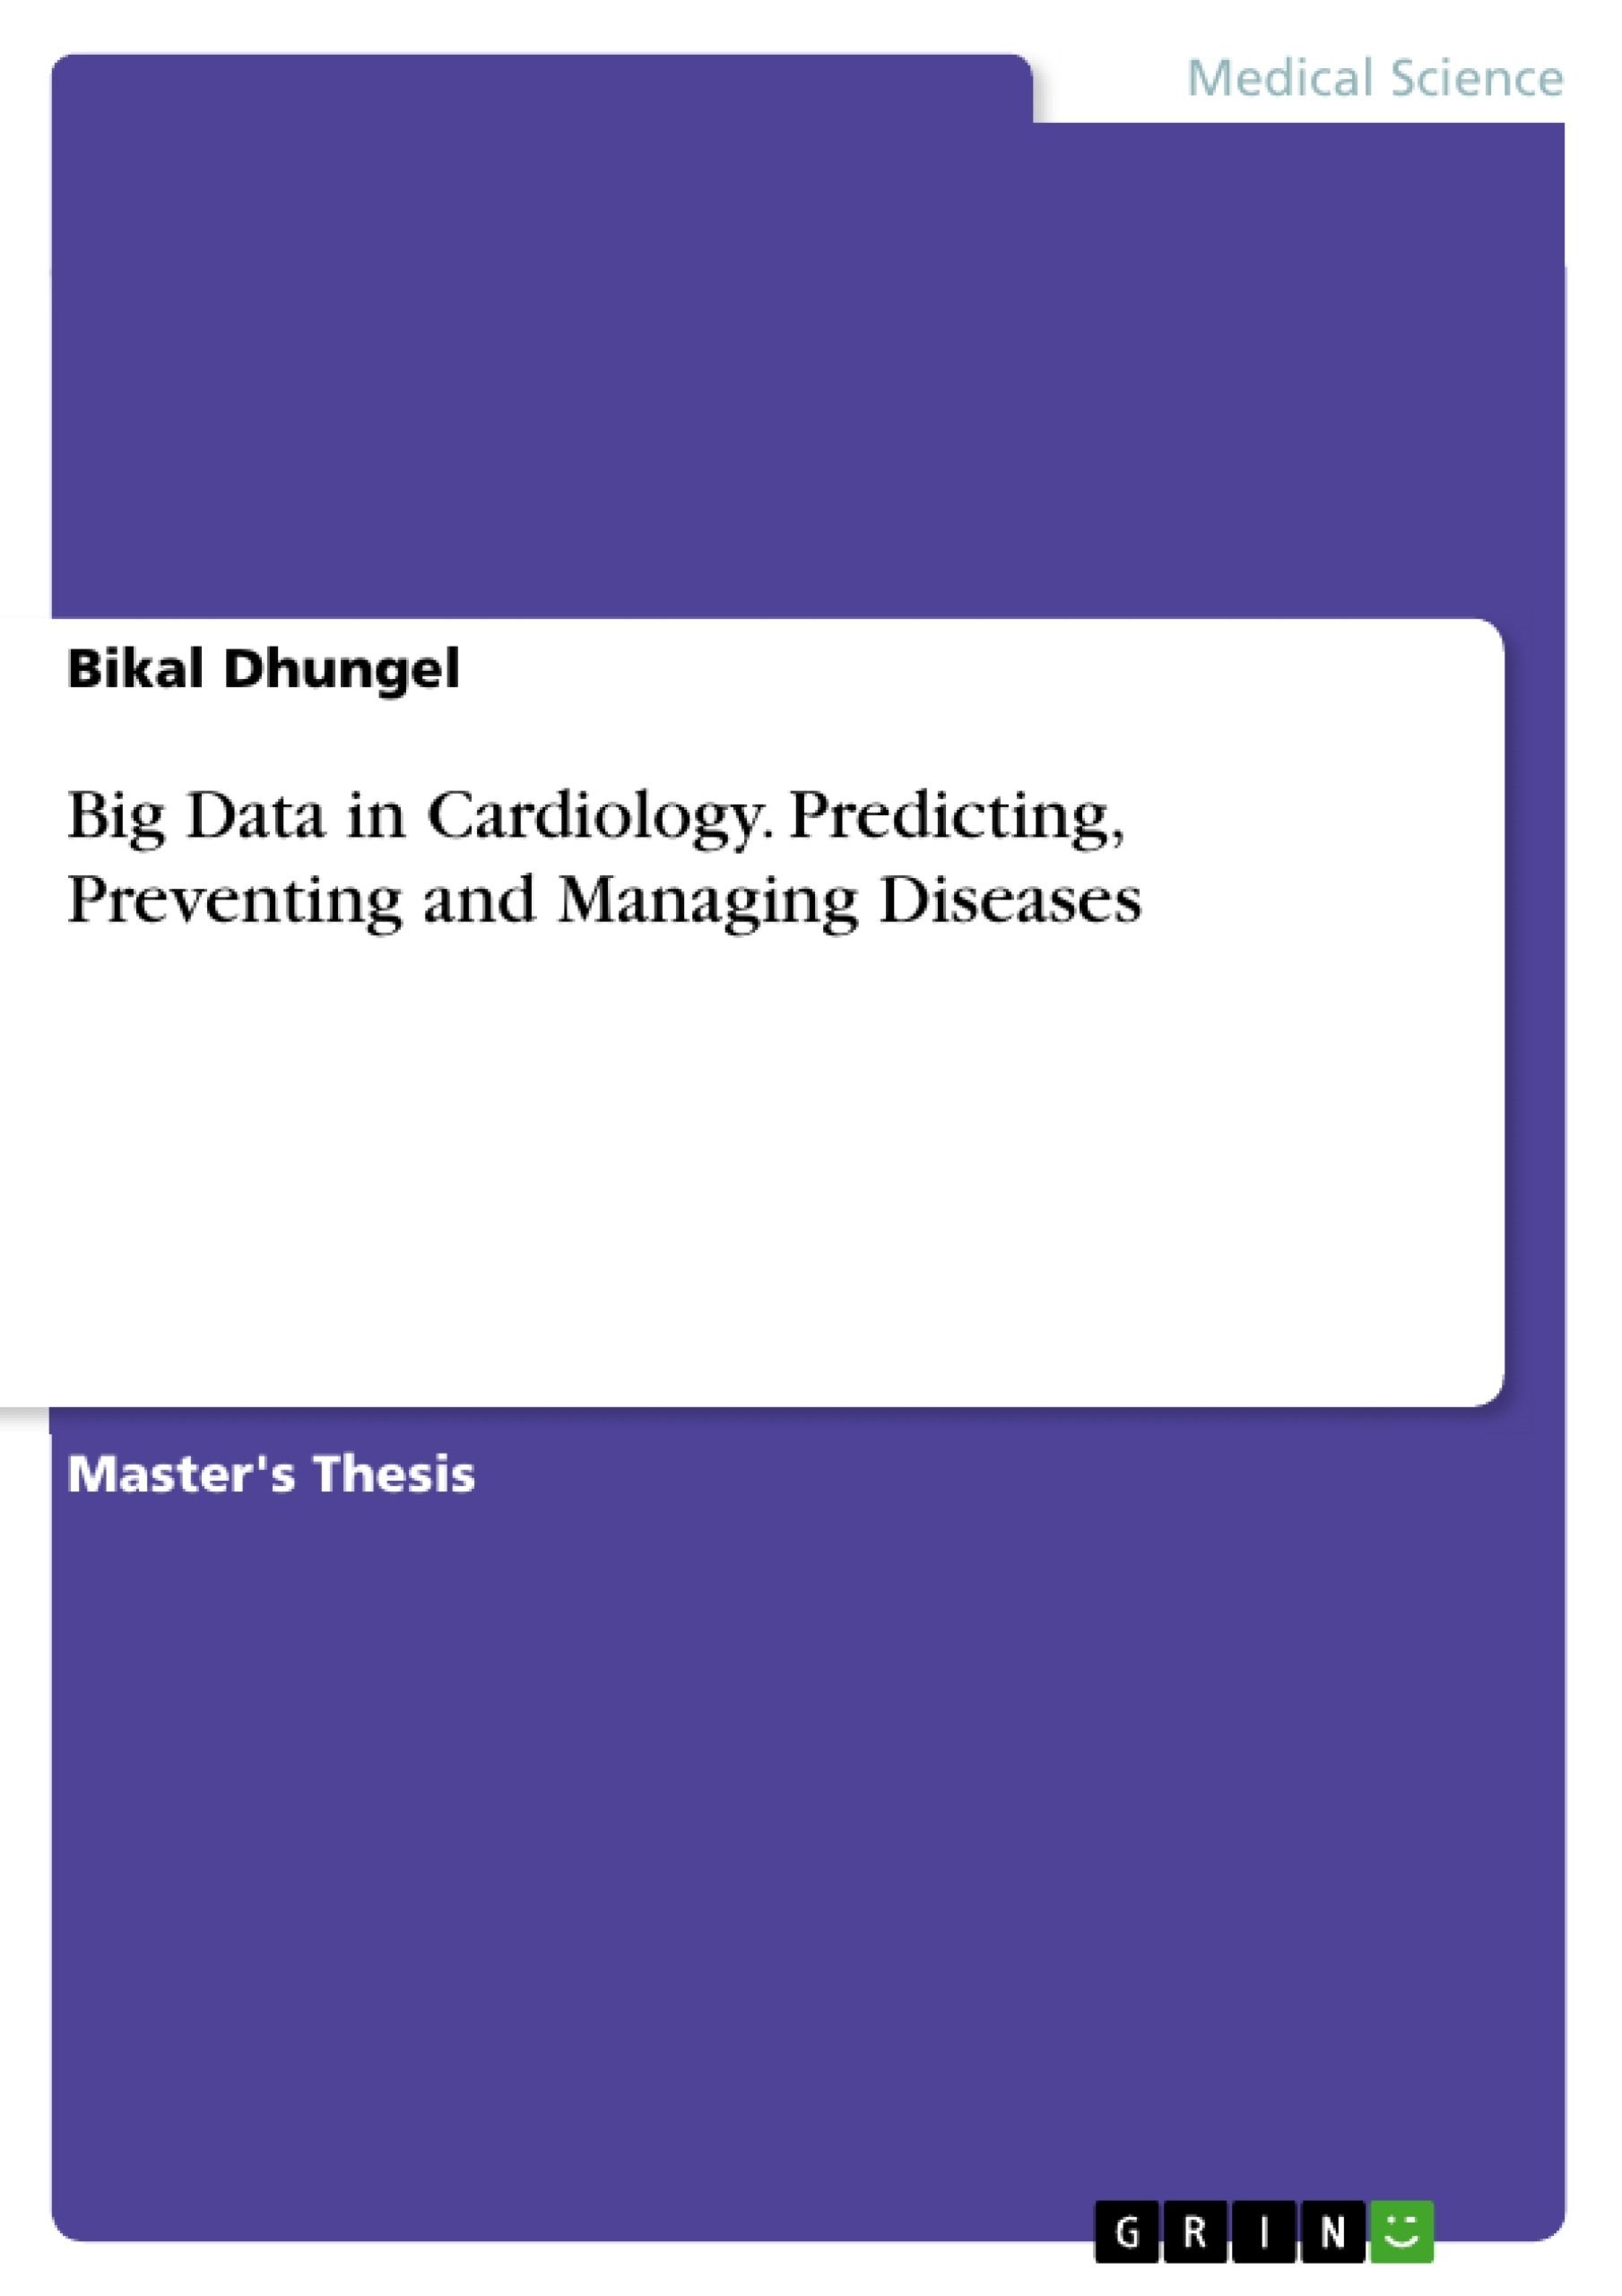 Title: Big Data in Cardiology. Predicting, Preventing and Managing Diseases